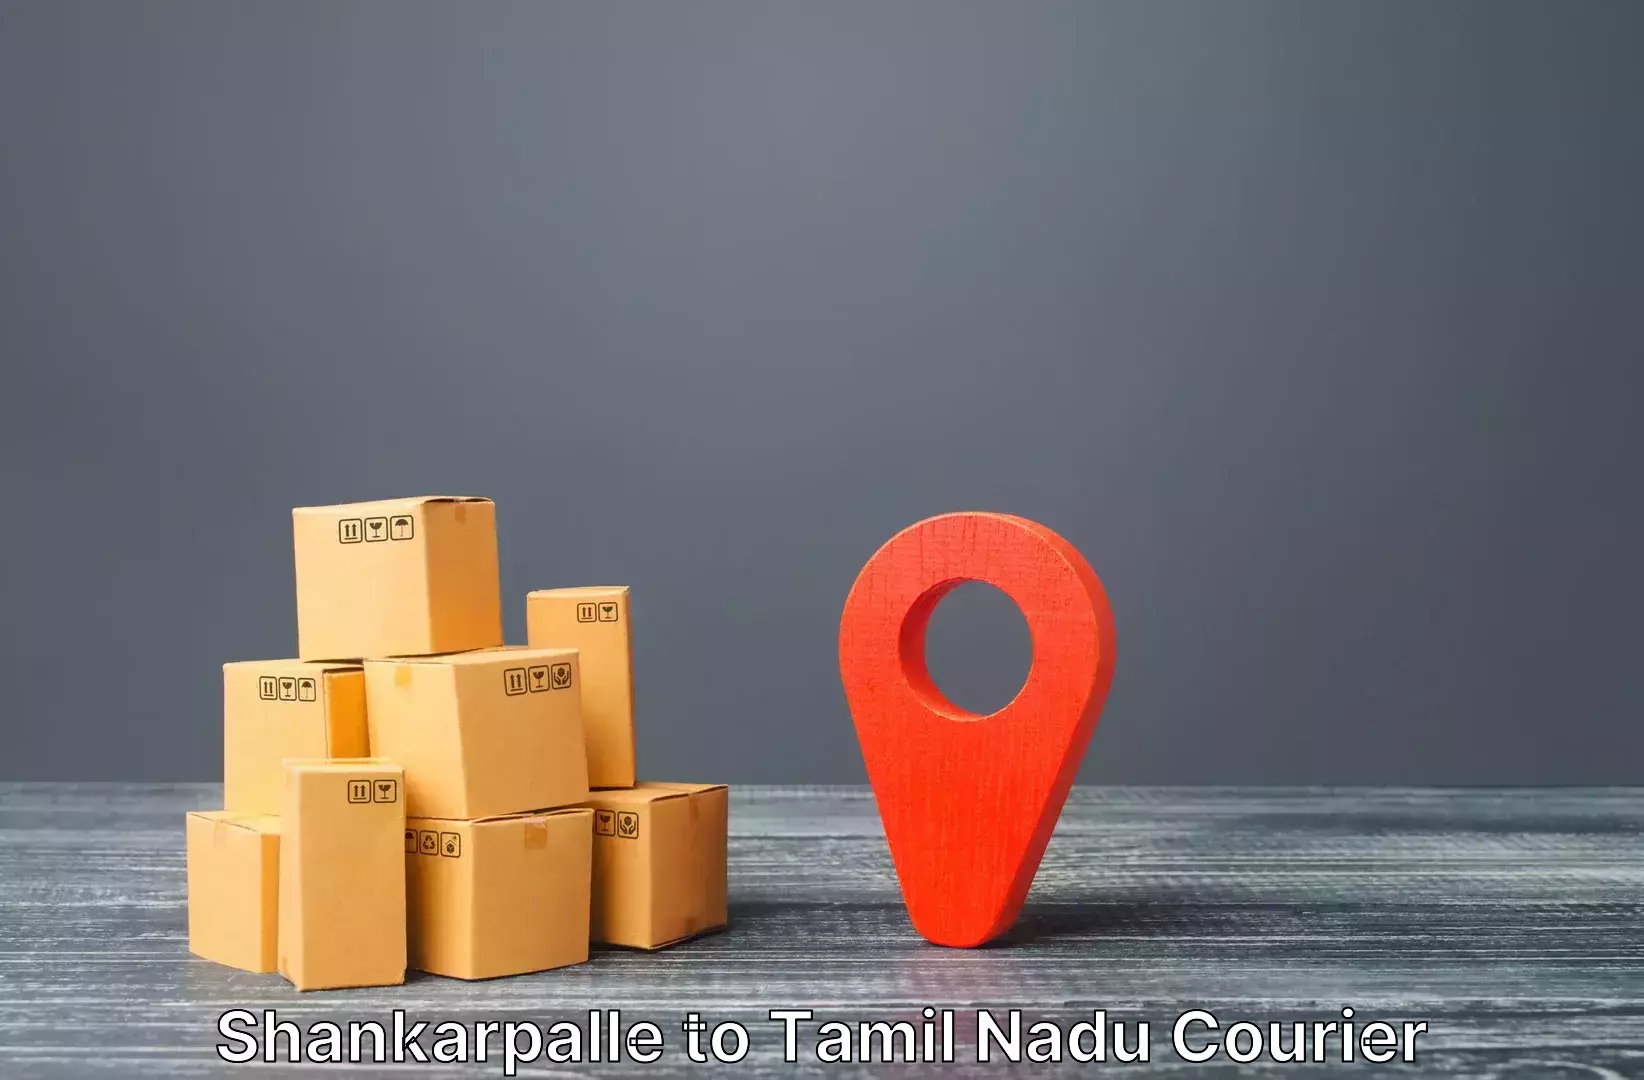 Luggage shipping specialists Shankarpalle to Tiruppur